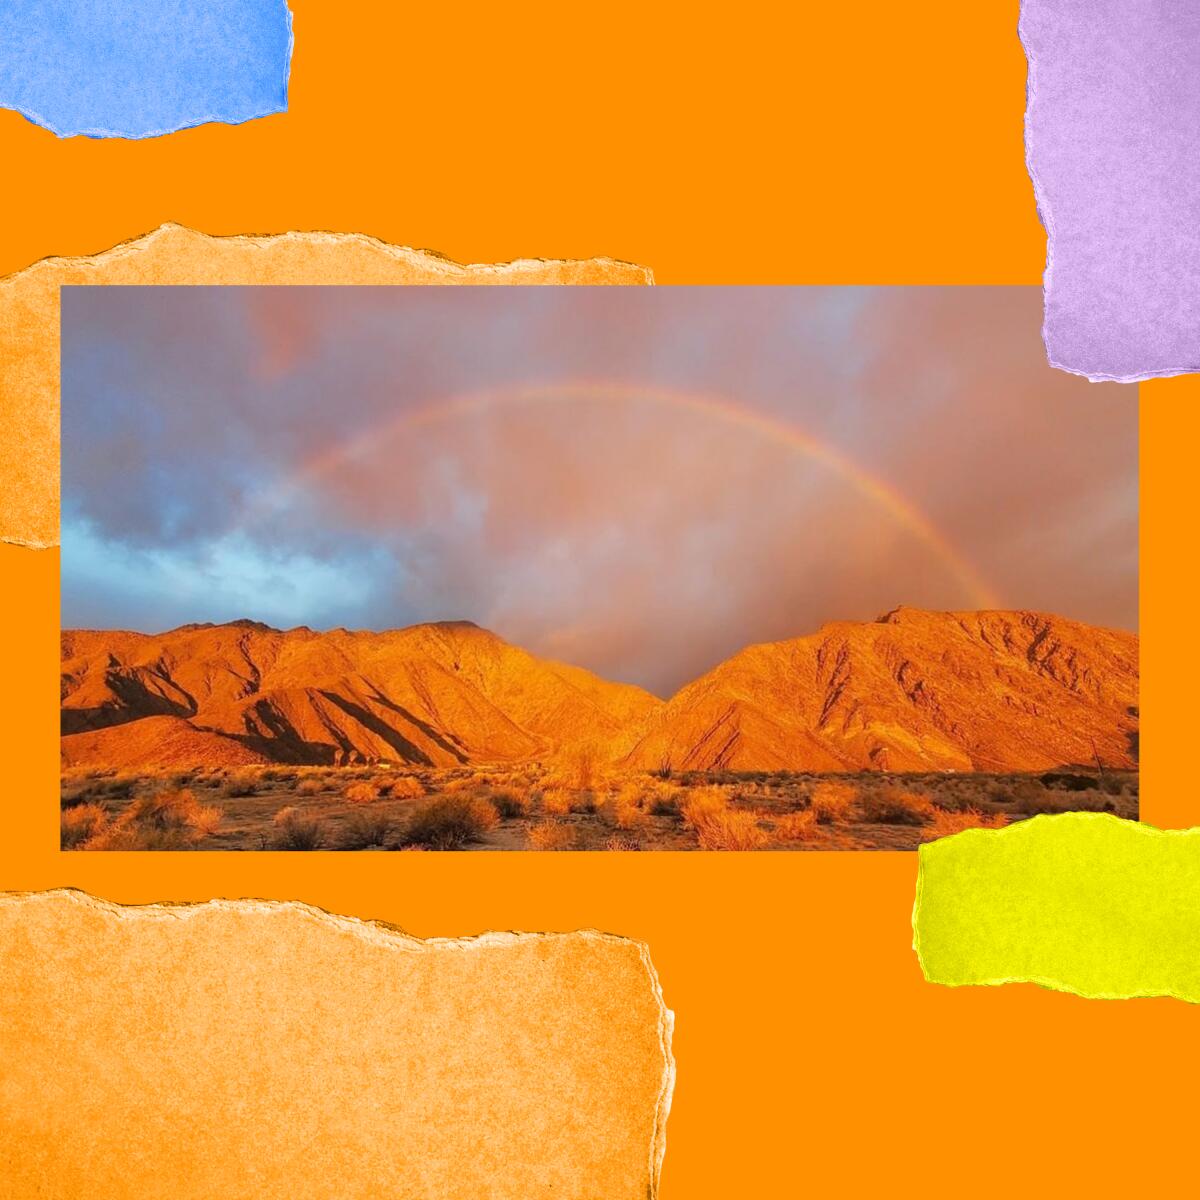 Desert mountains with dark clouds, a bit of blue sky and an orange-y rainbow.